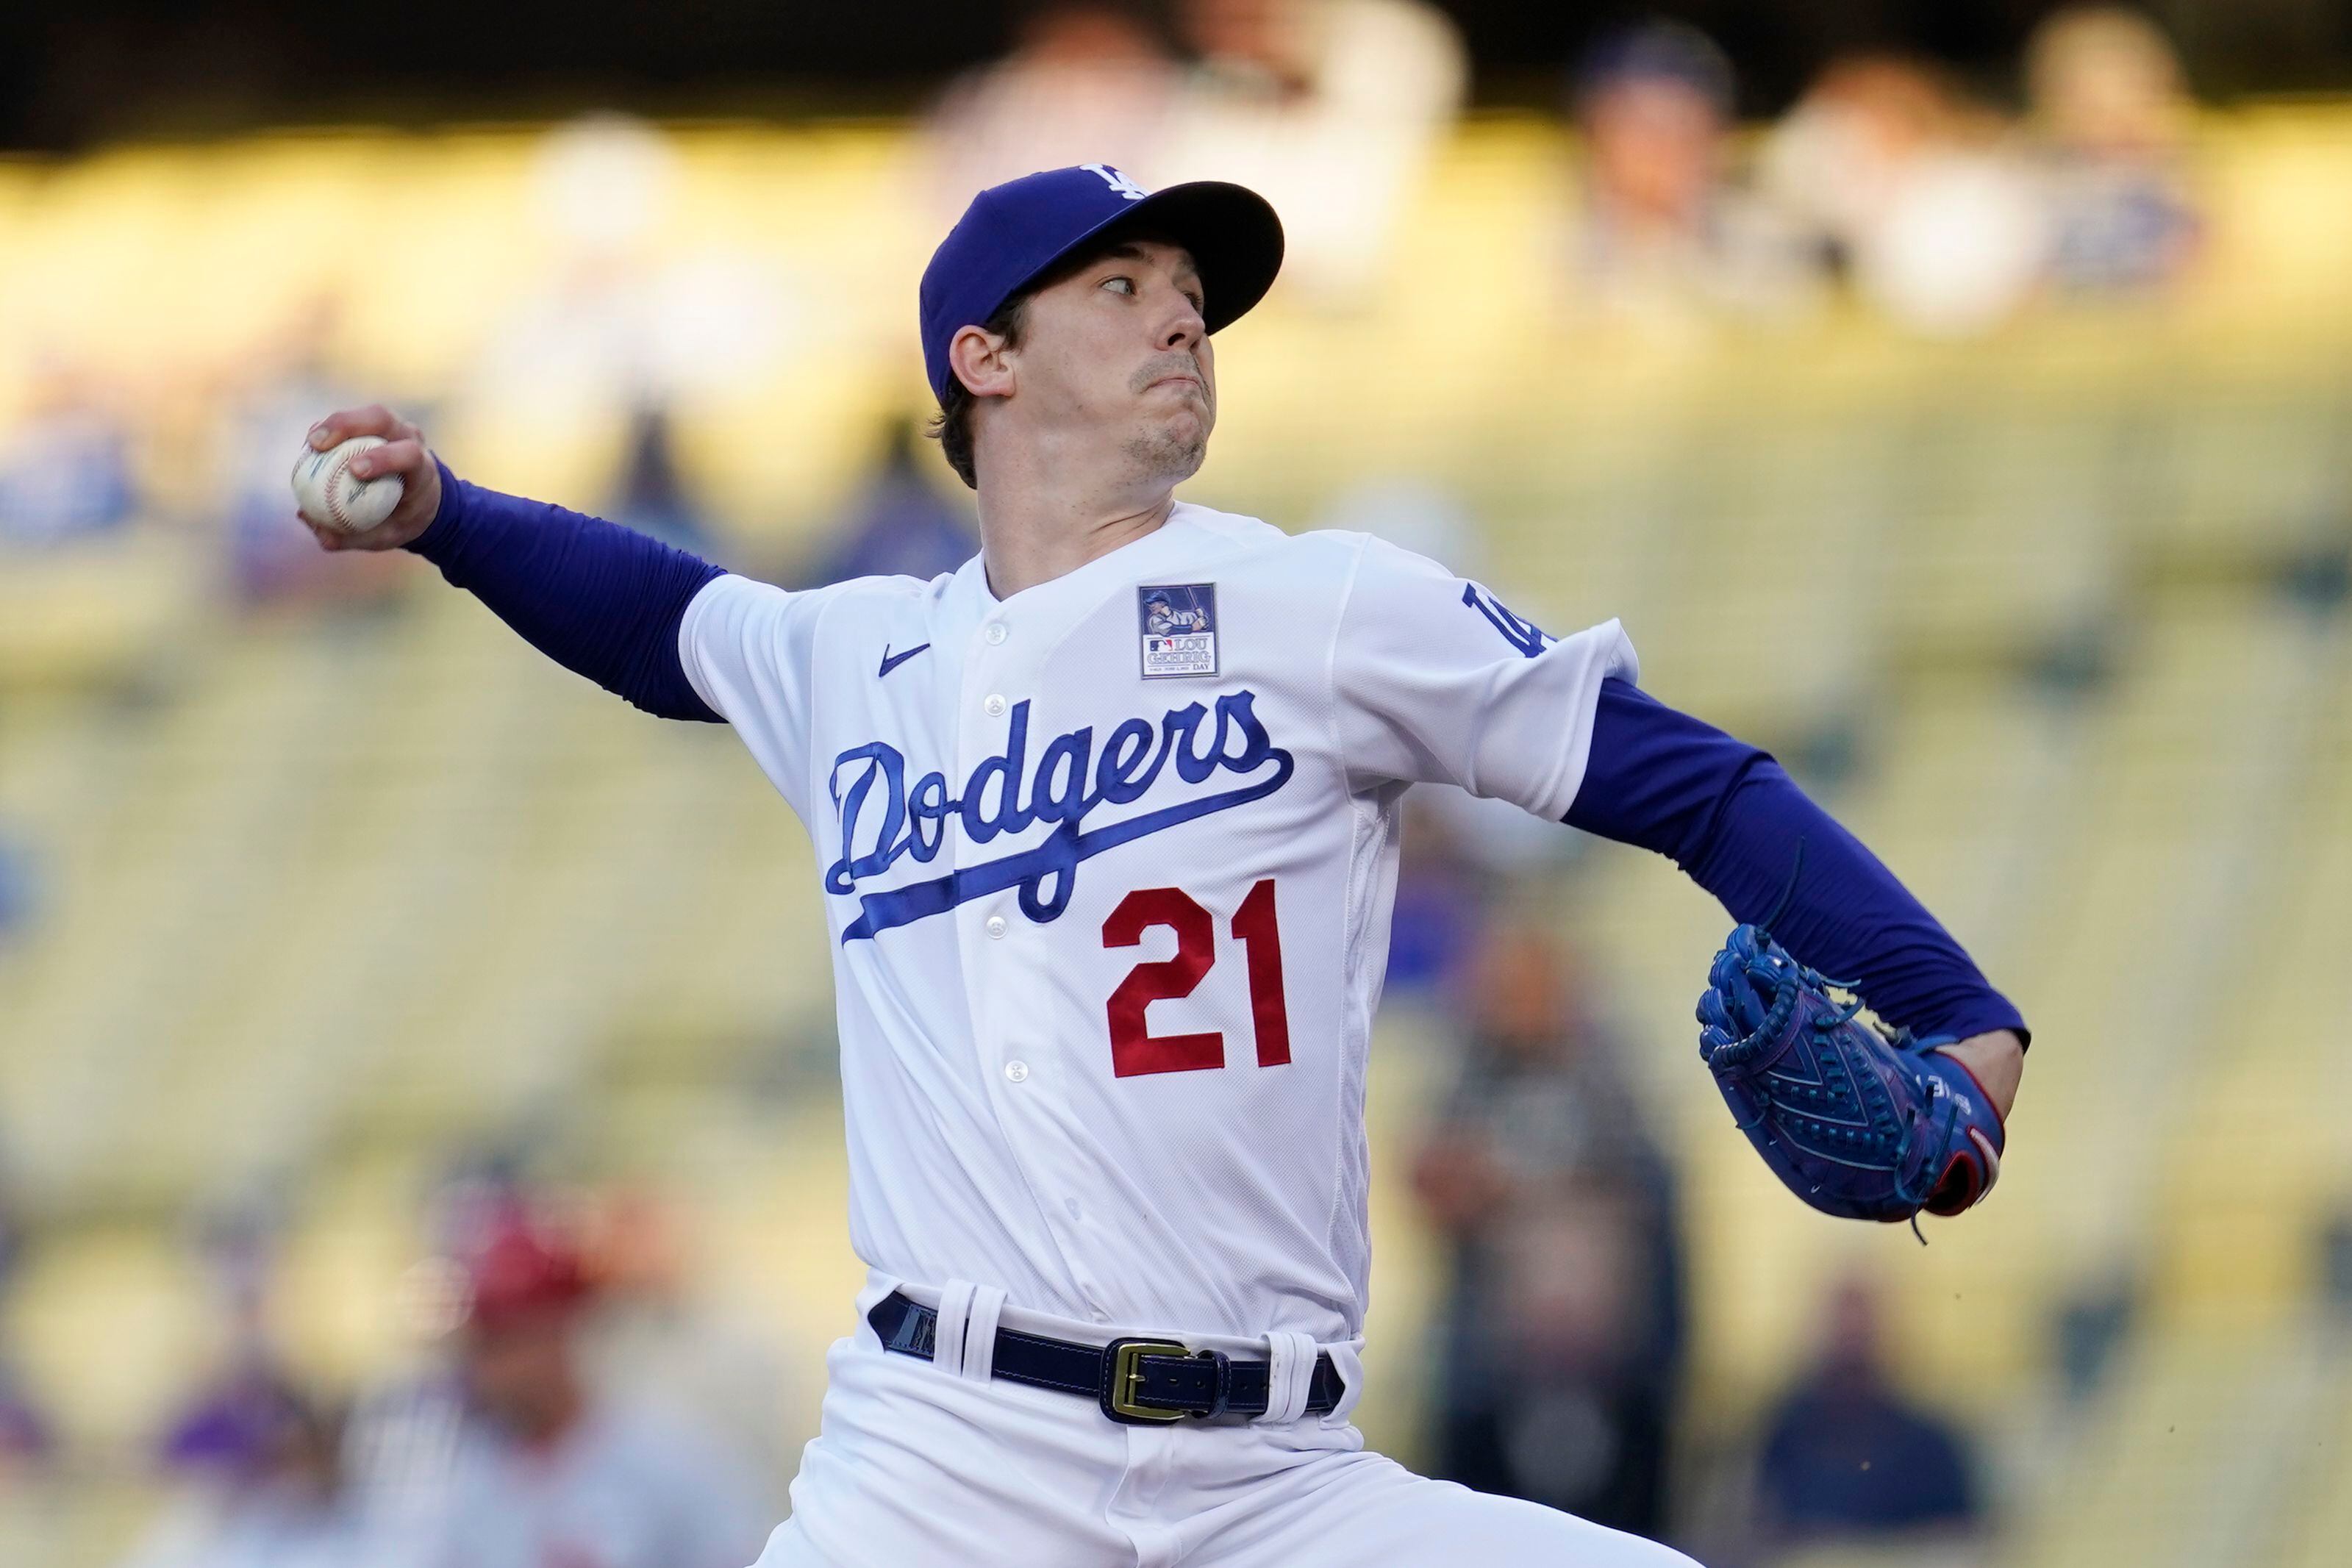 Record onslaught: Dodgers score 11 in 1st to rout Cards 14-3